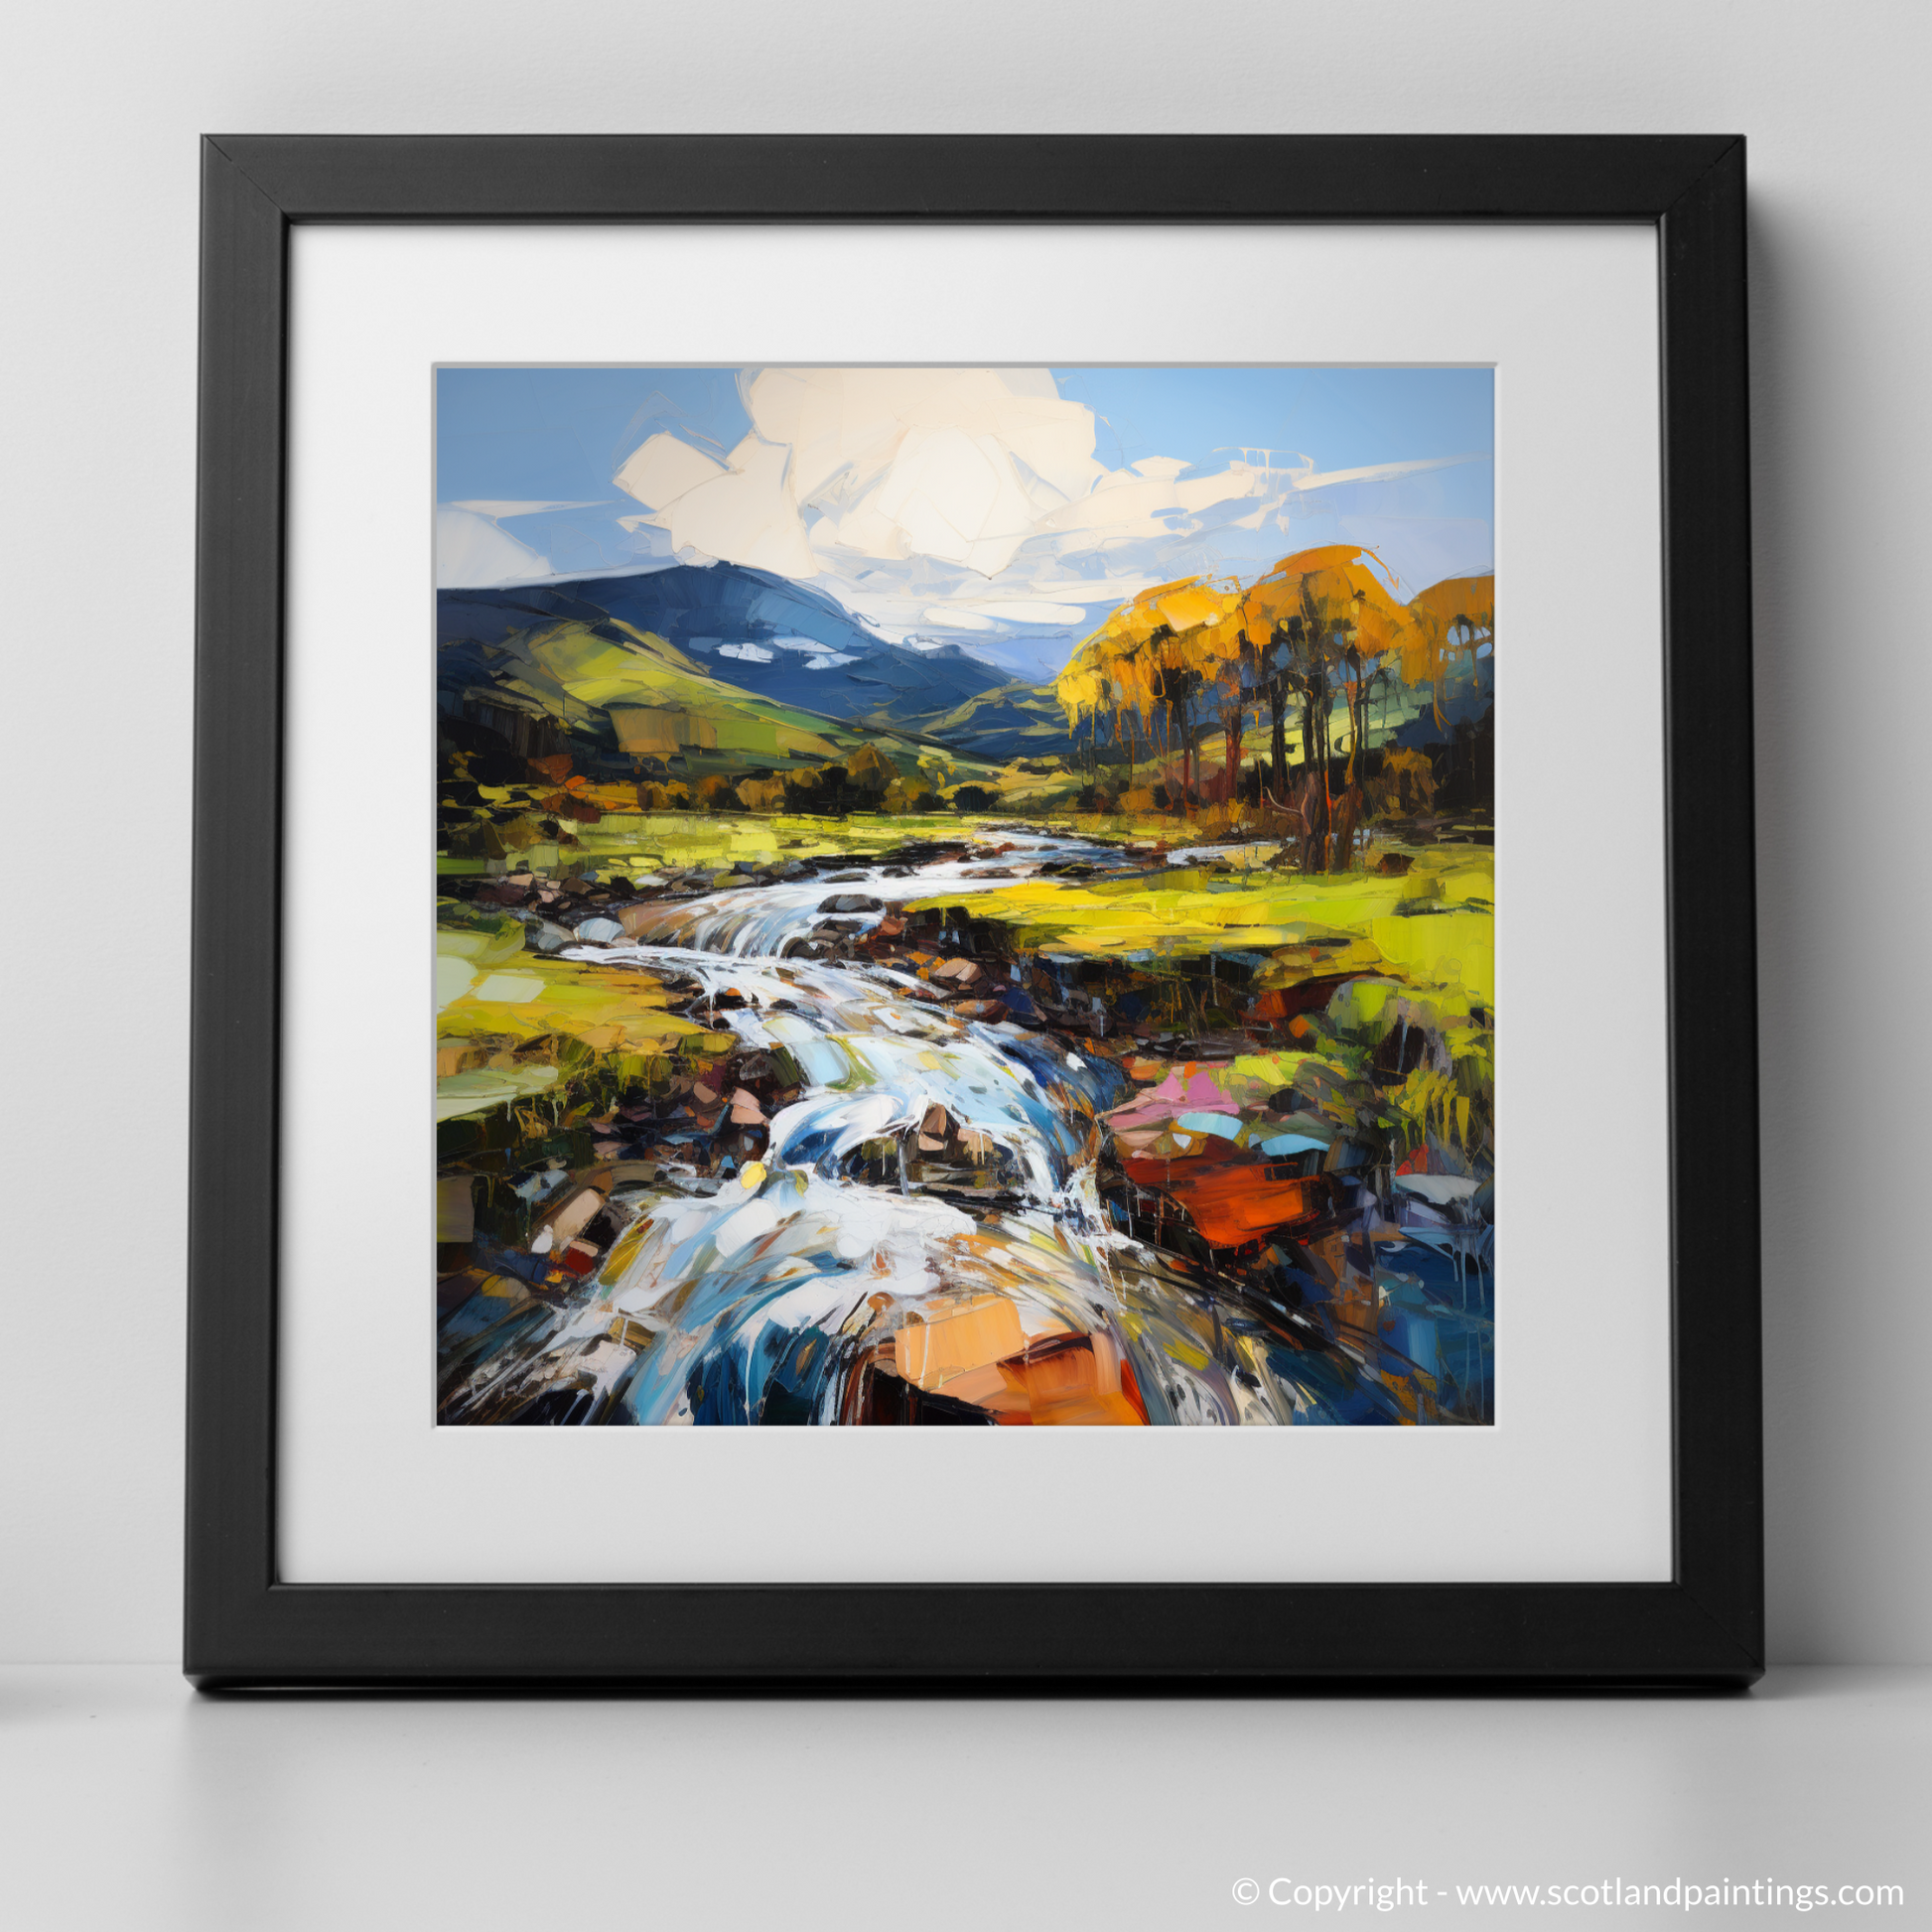 Art Print of River Carron, Ross-shire with a black frame